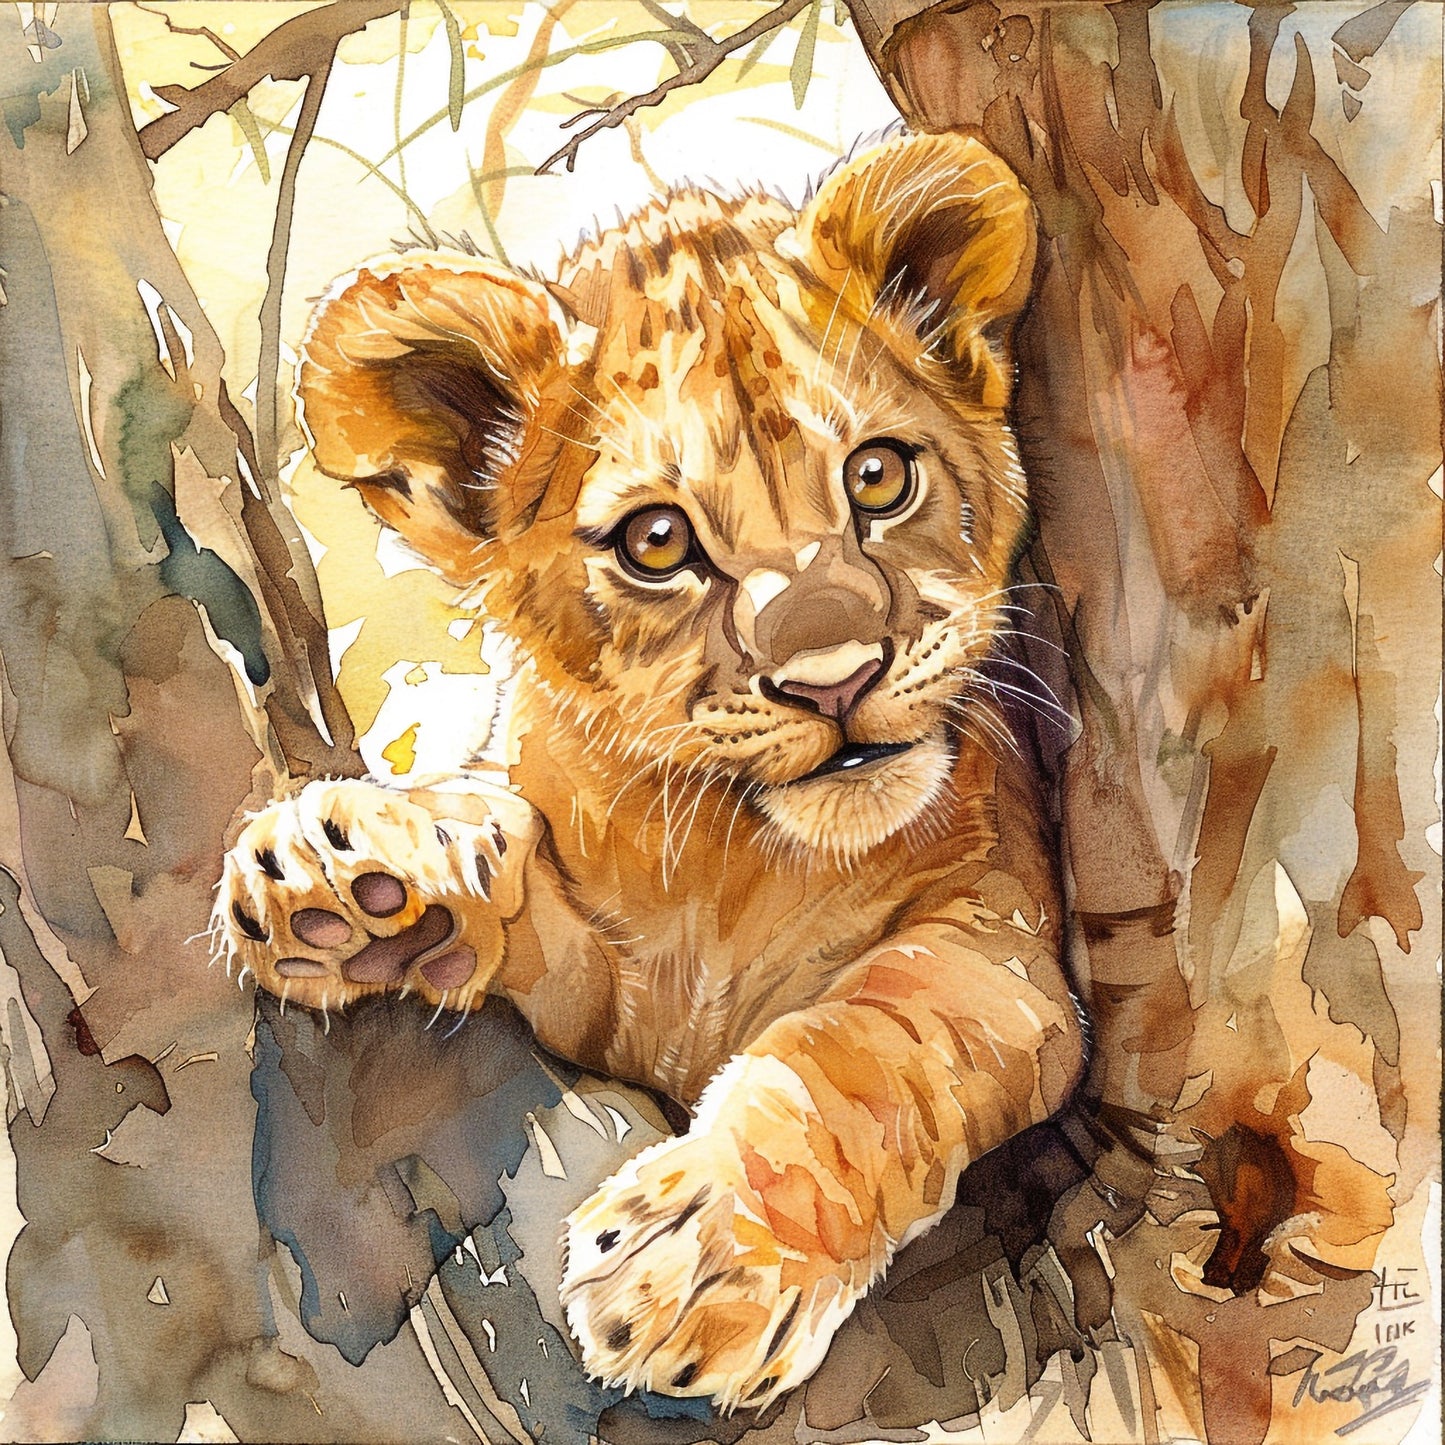 Playful Lion Cub in Nature Watercolor Illustration